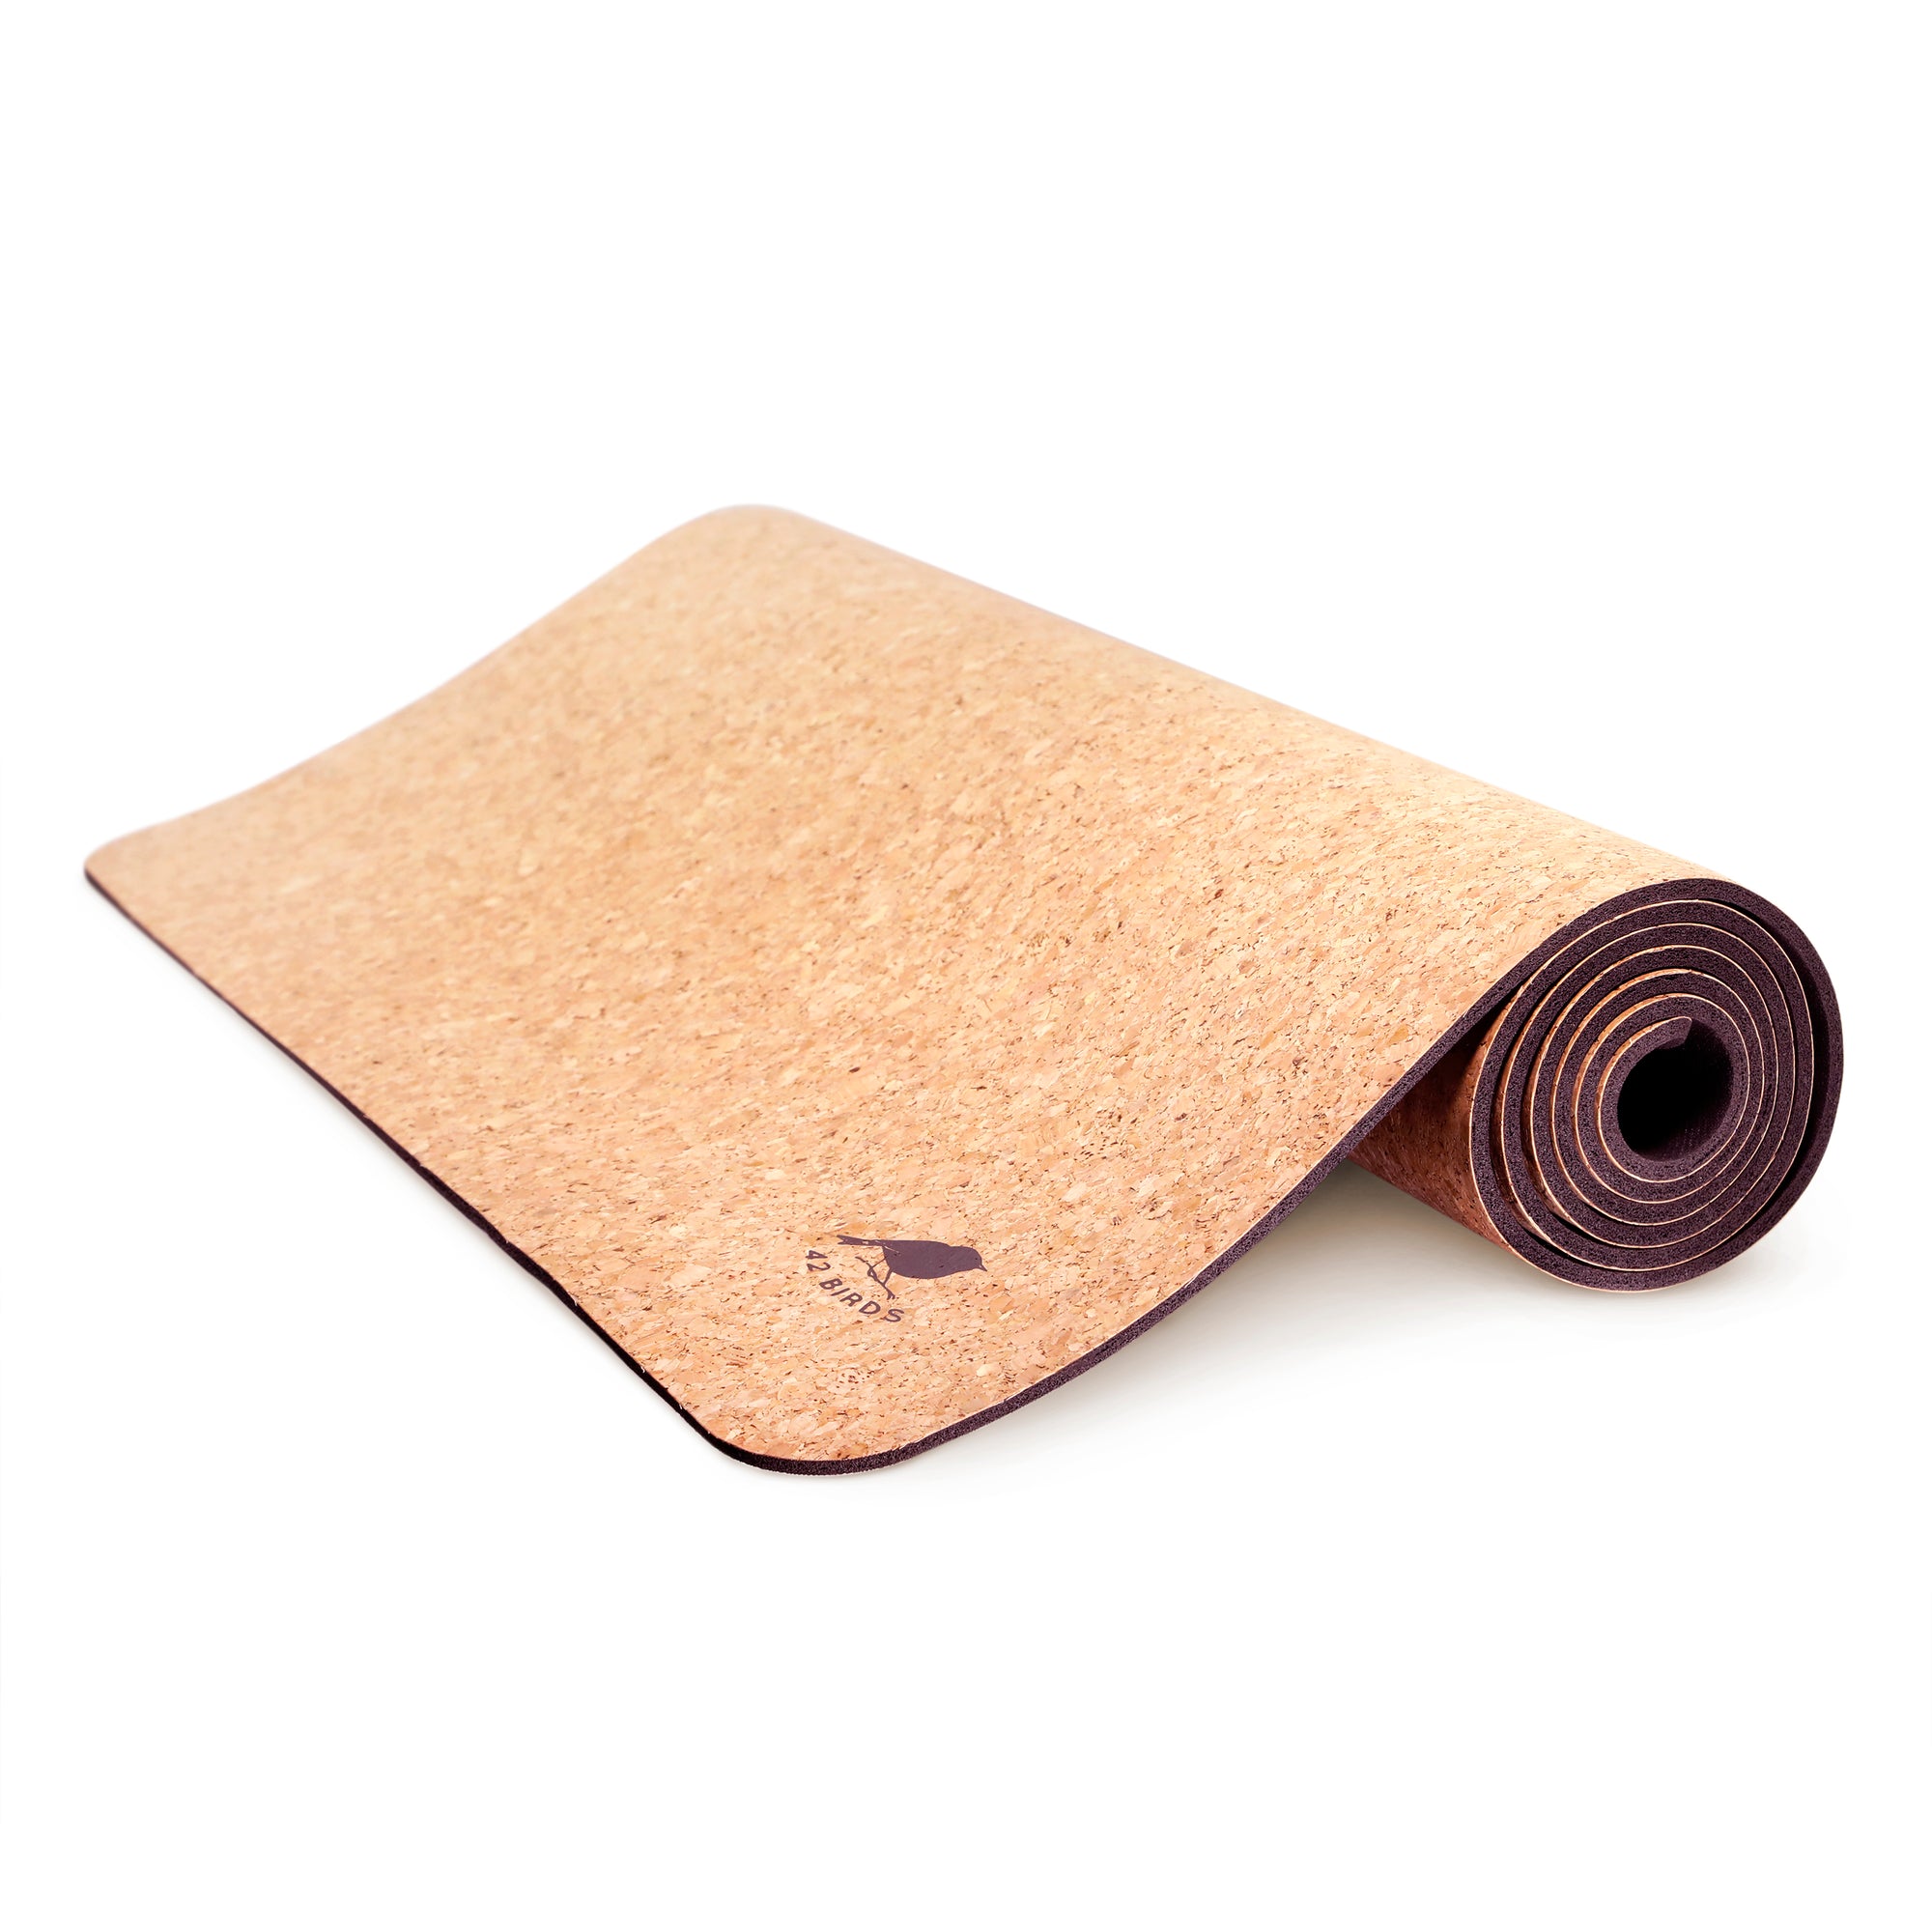 Cork Yoga Industrial Mat “The Imperial Eagle” - 42 Birds